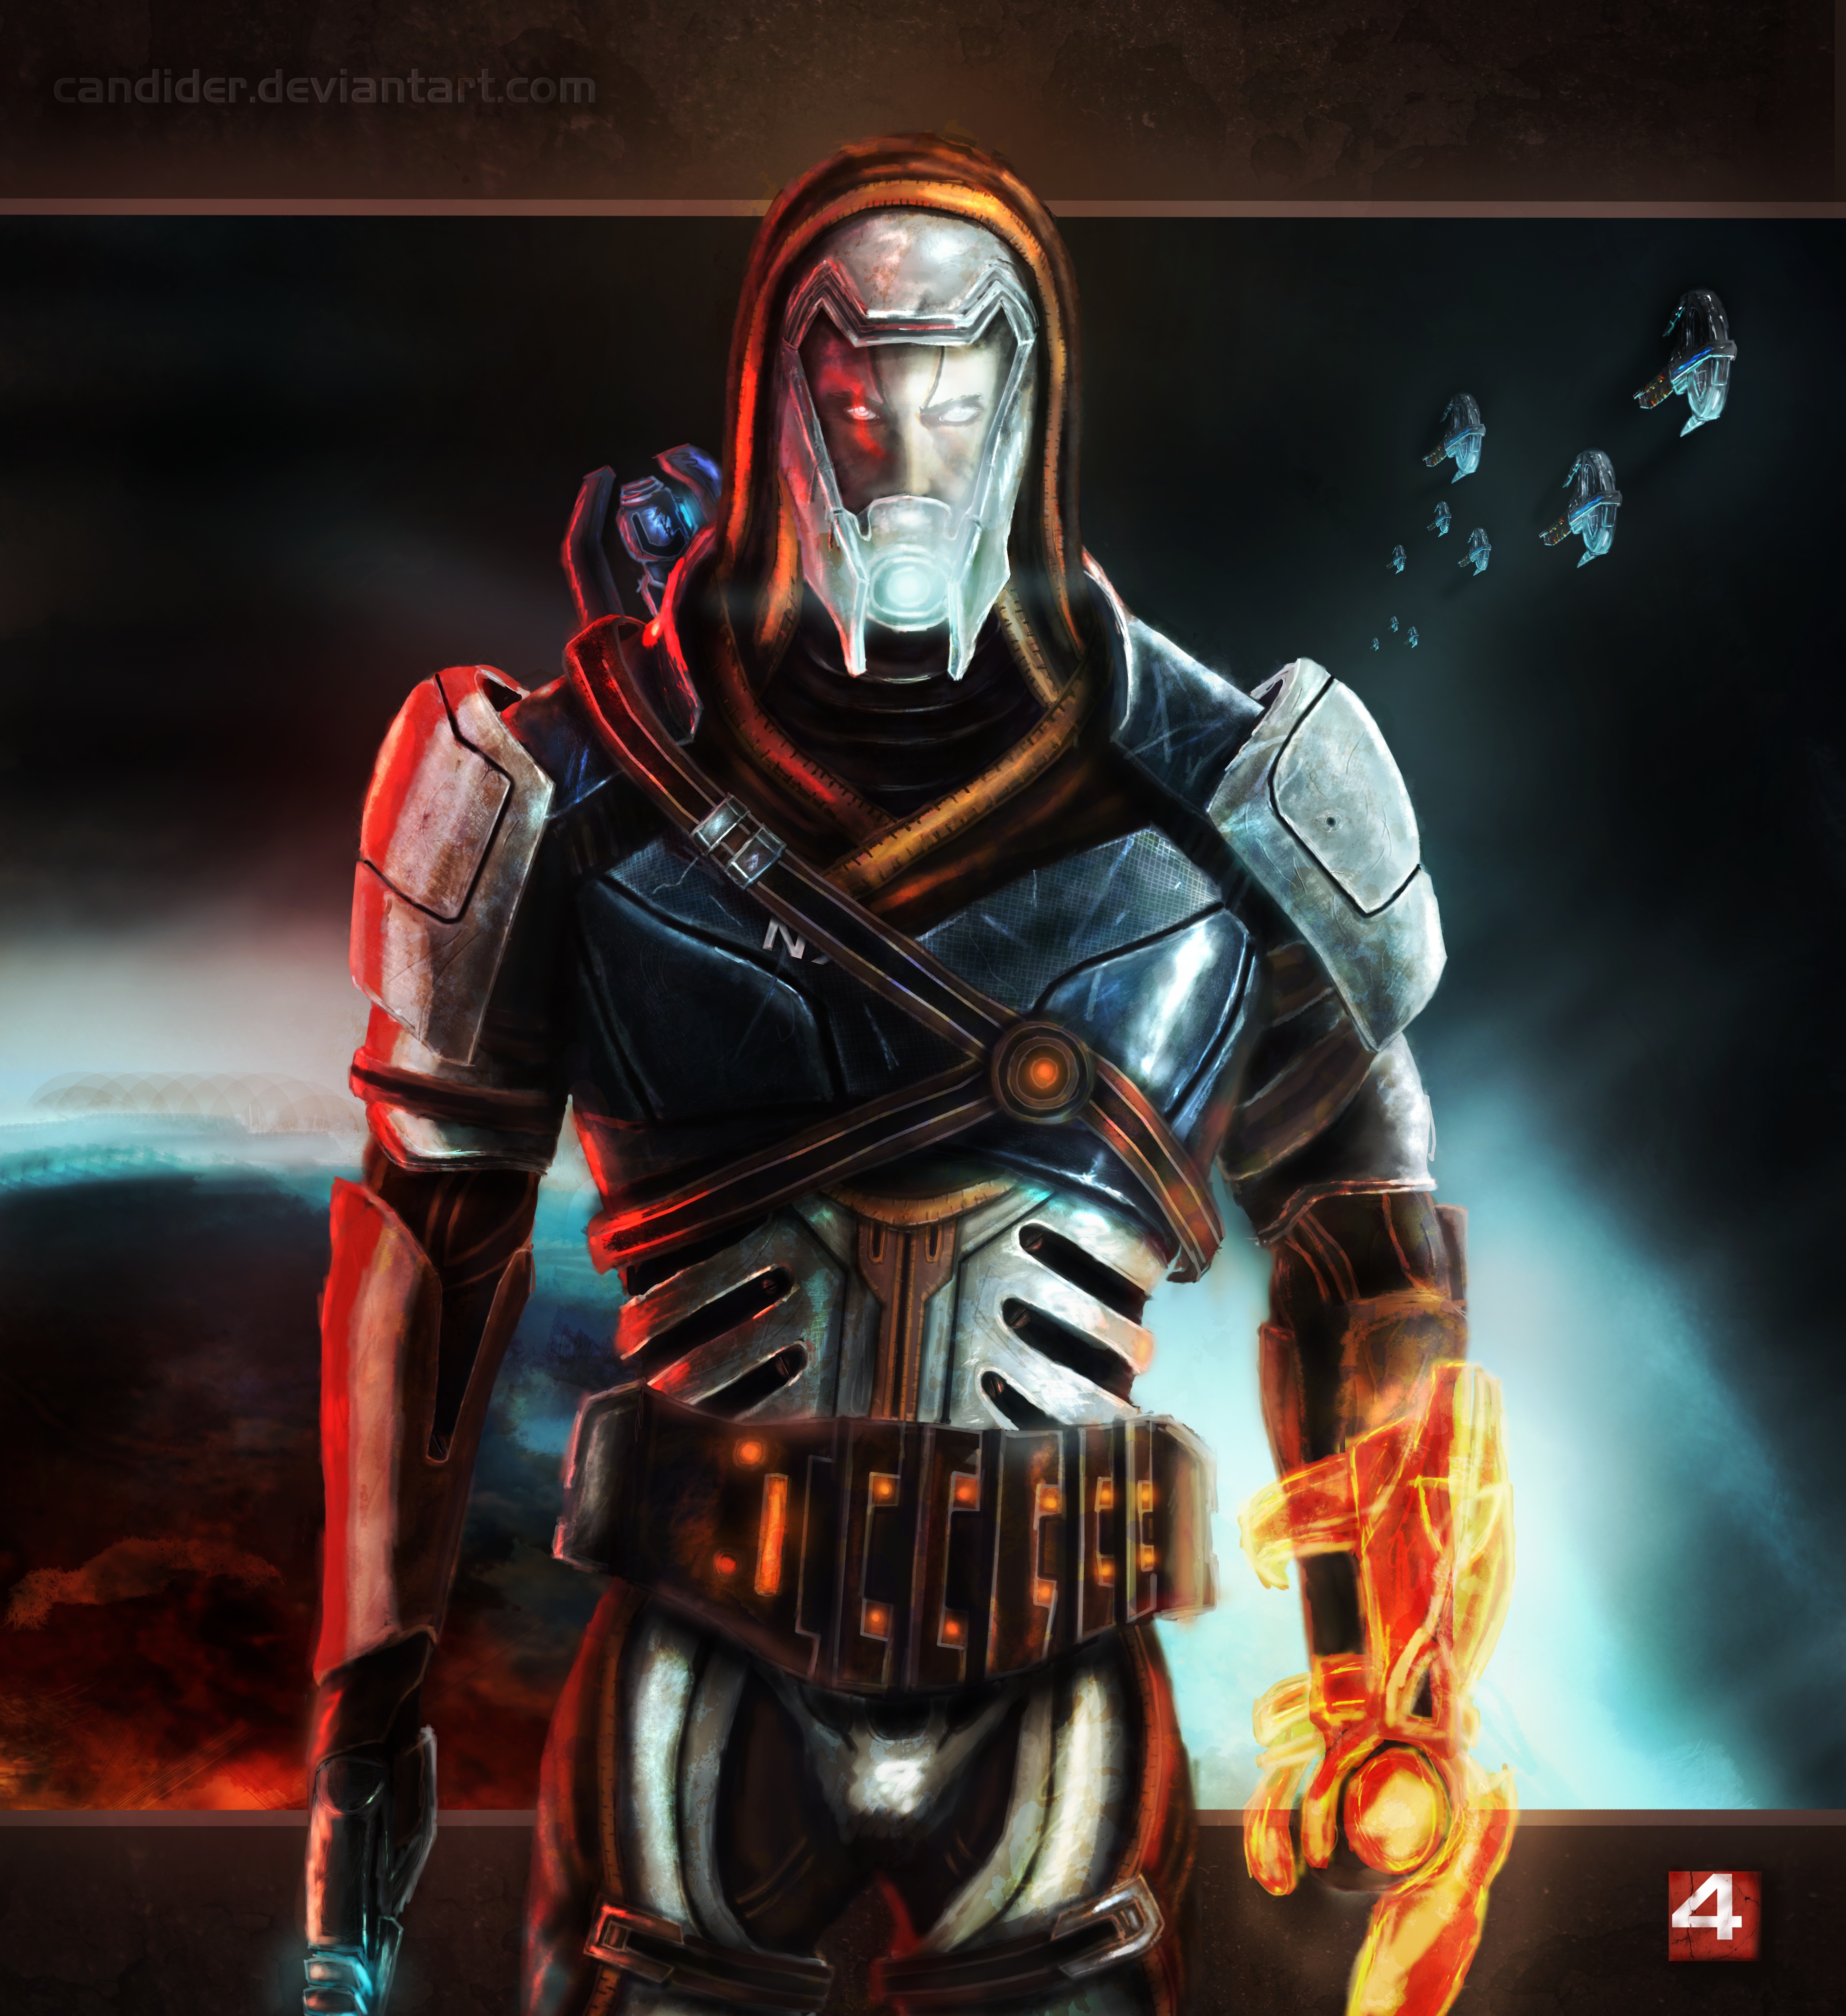 mass_effect____new_savior_of_the_galaxy_by_candider-d5sn4fa.jpg